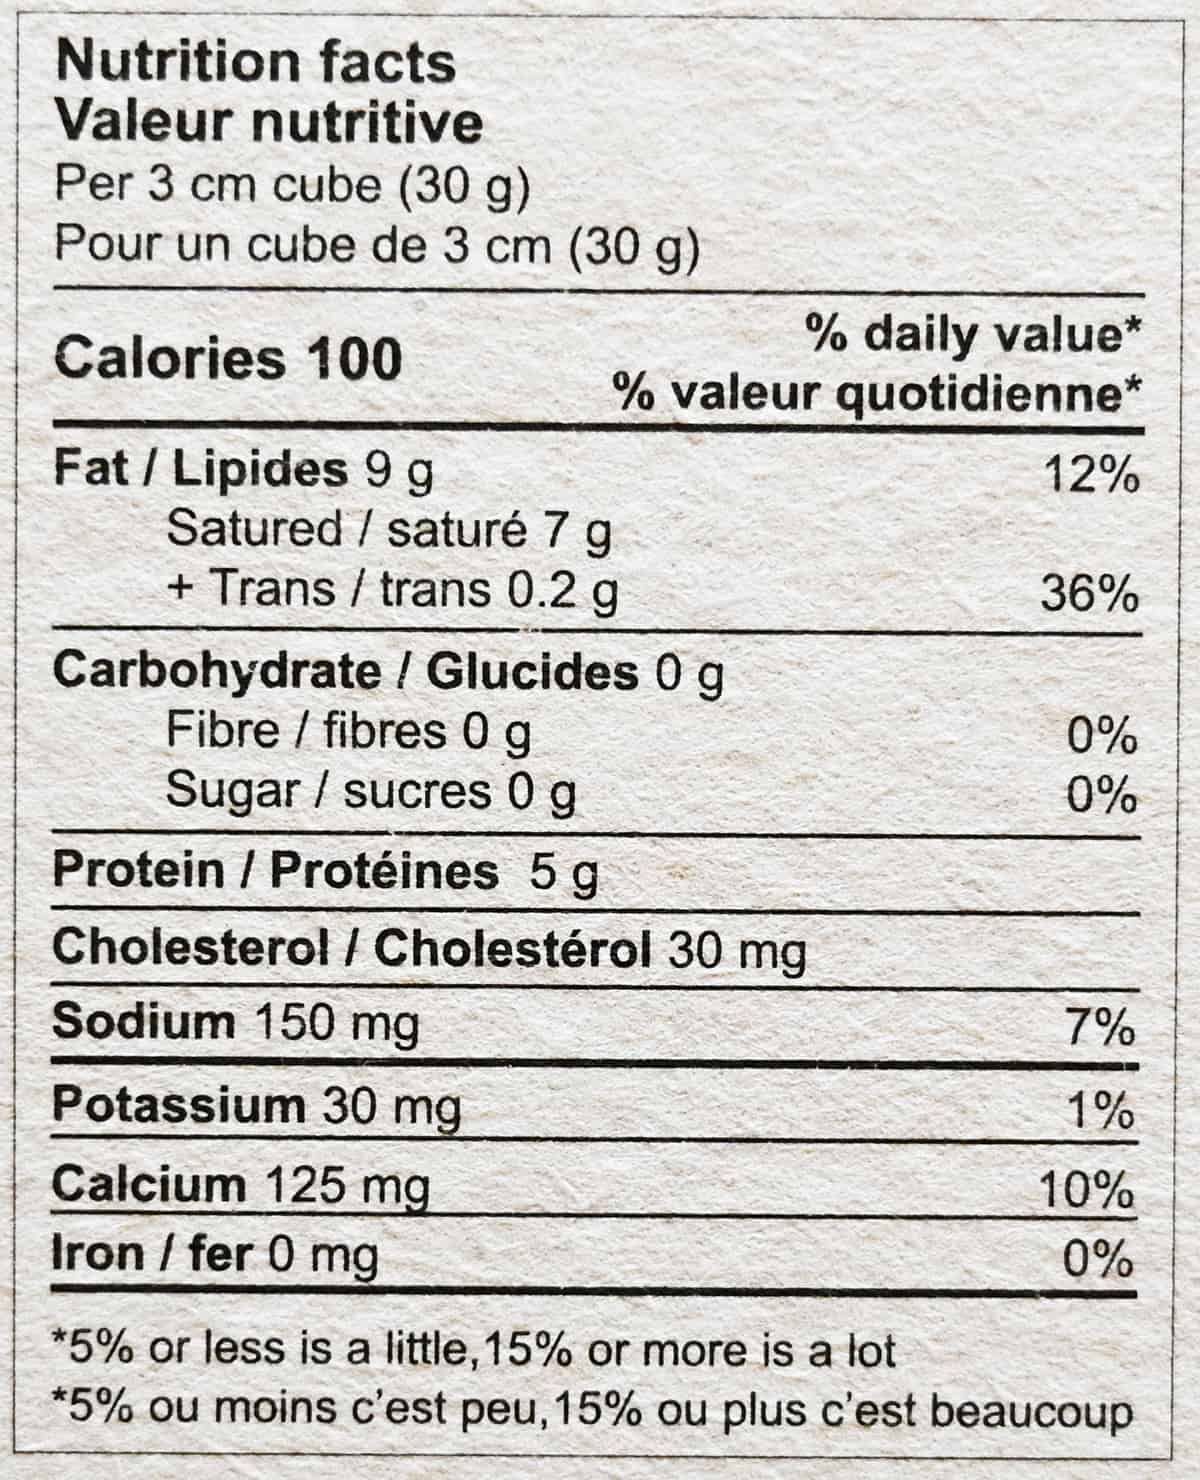 Image of the nutrition facts label from the packaging.